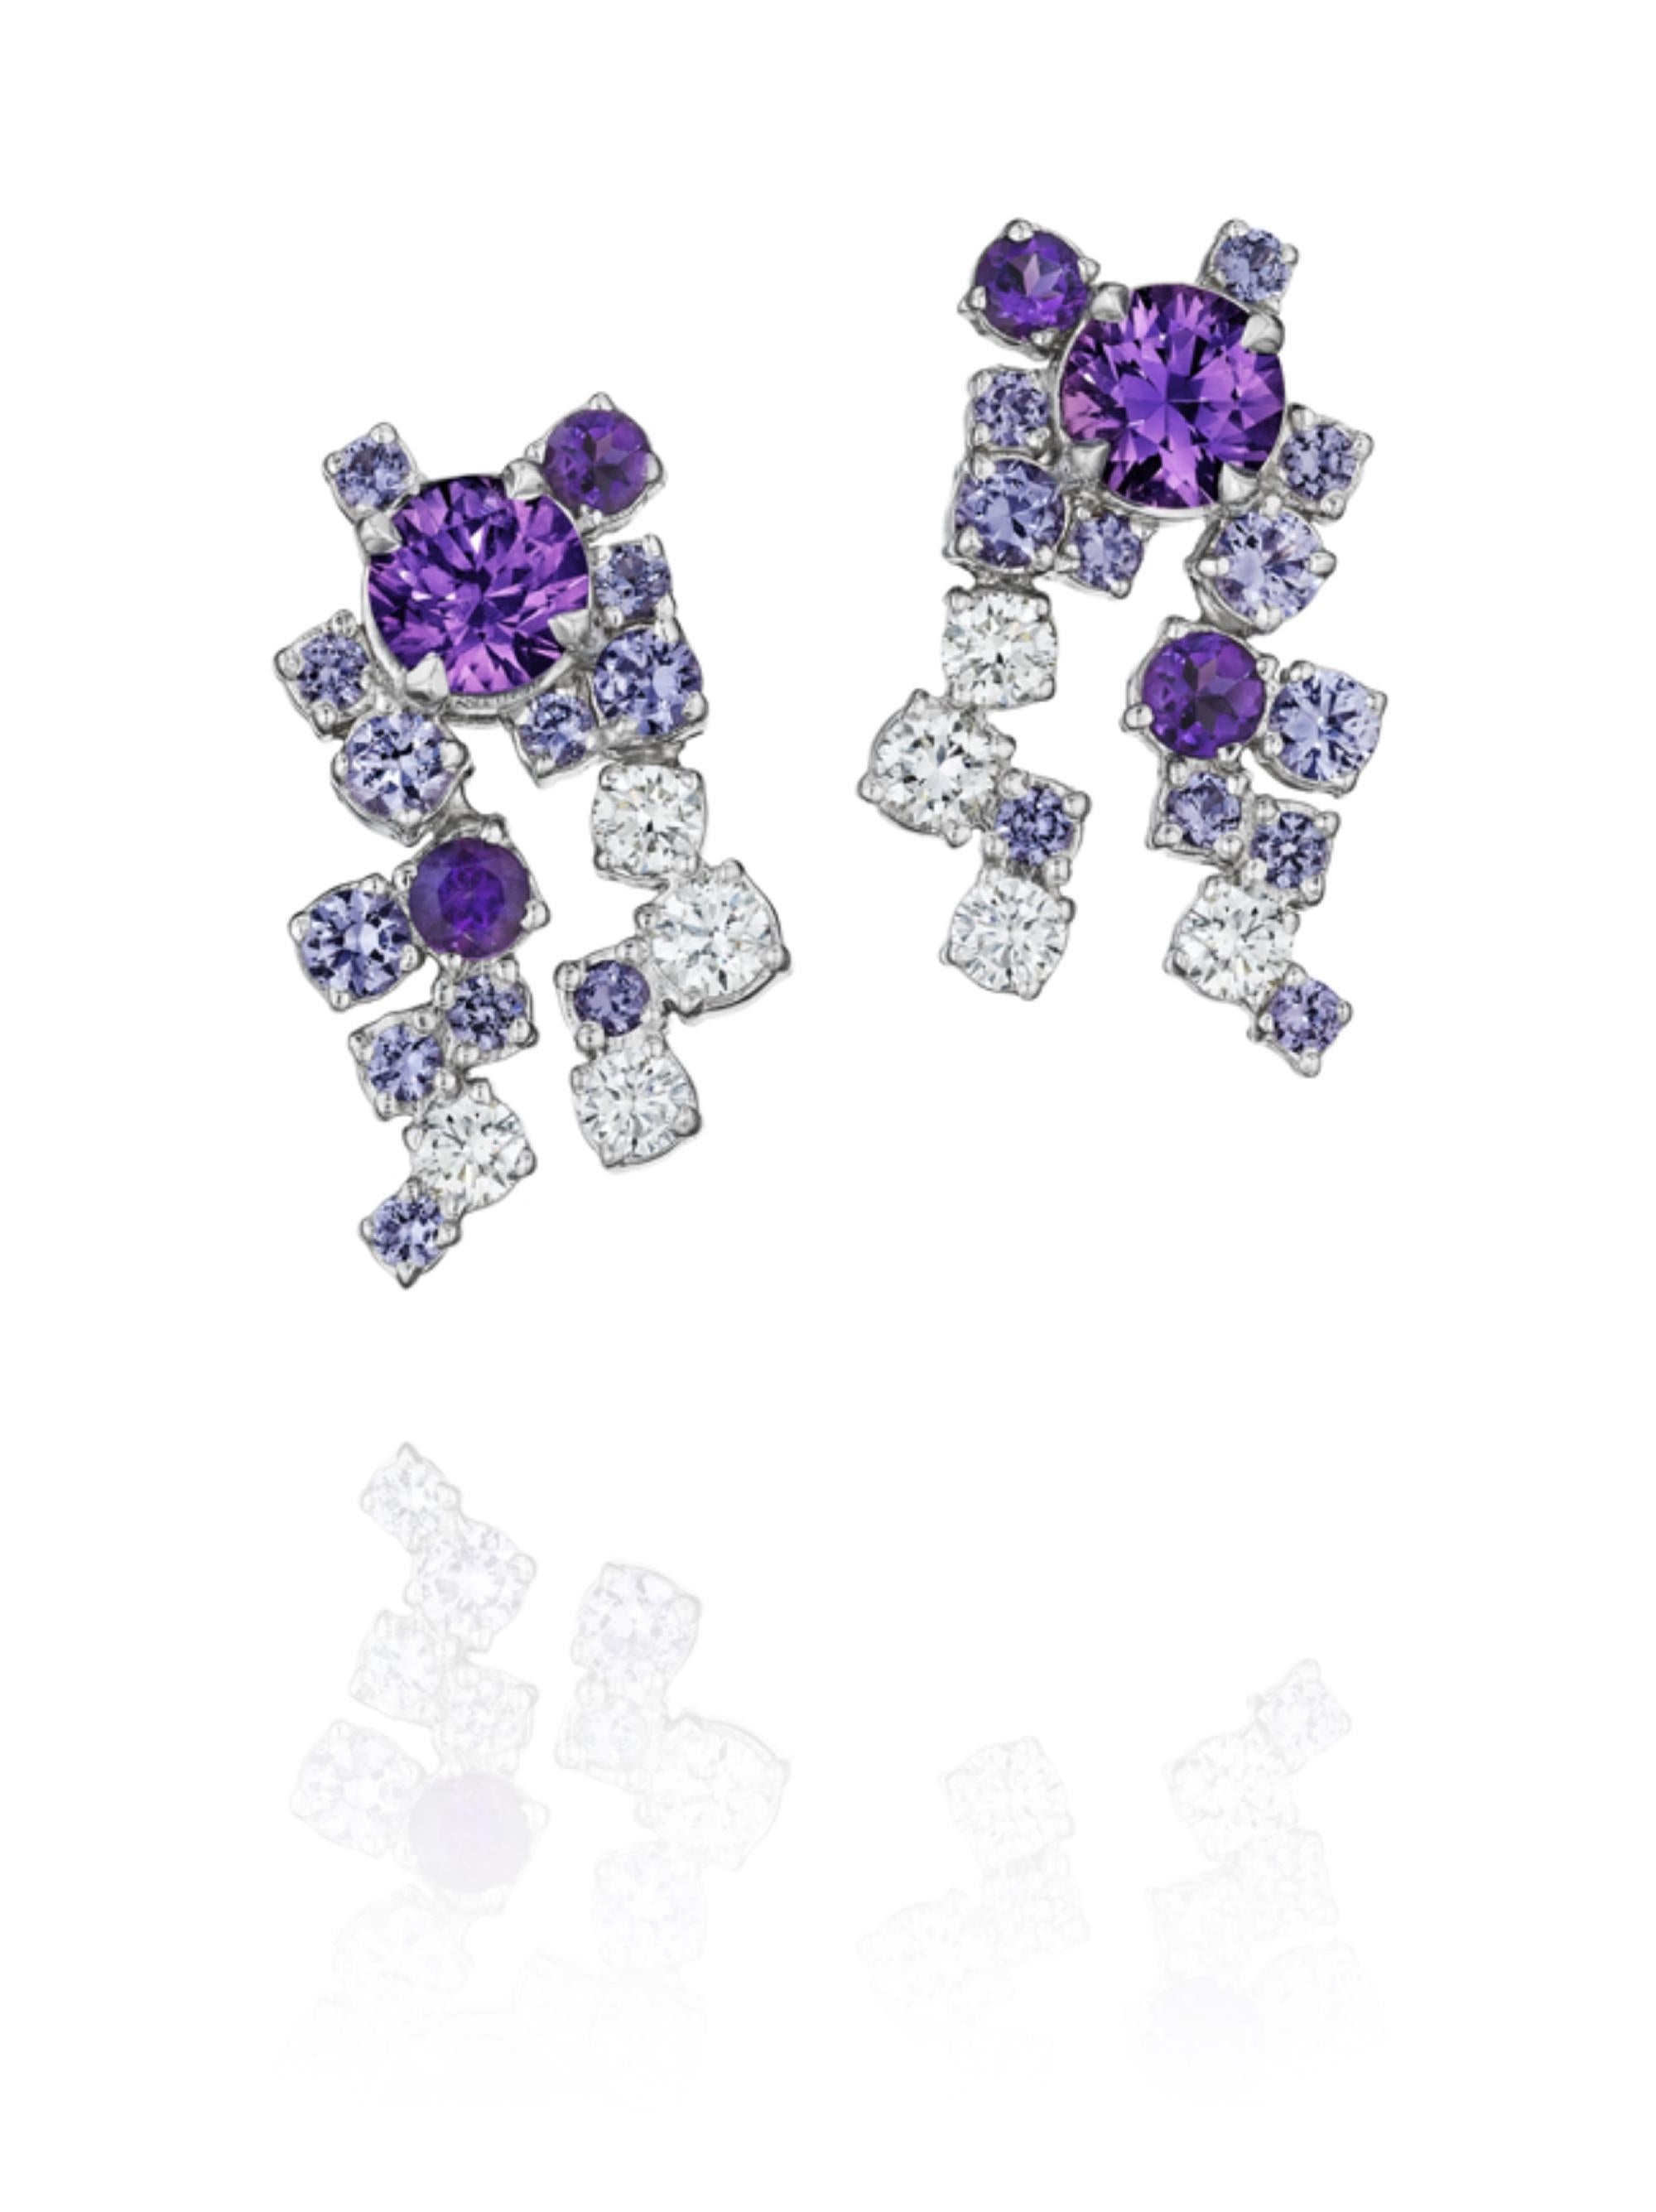 Artisan Melting Ice 18k White Gold Purple Sapphire Earrings by MadStone For Sale